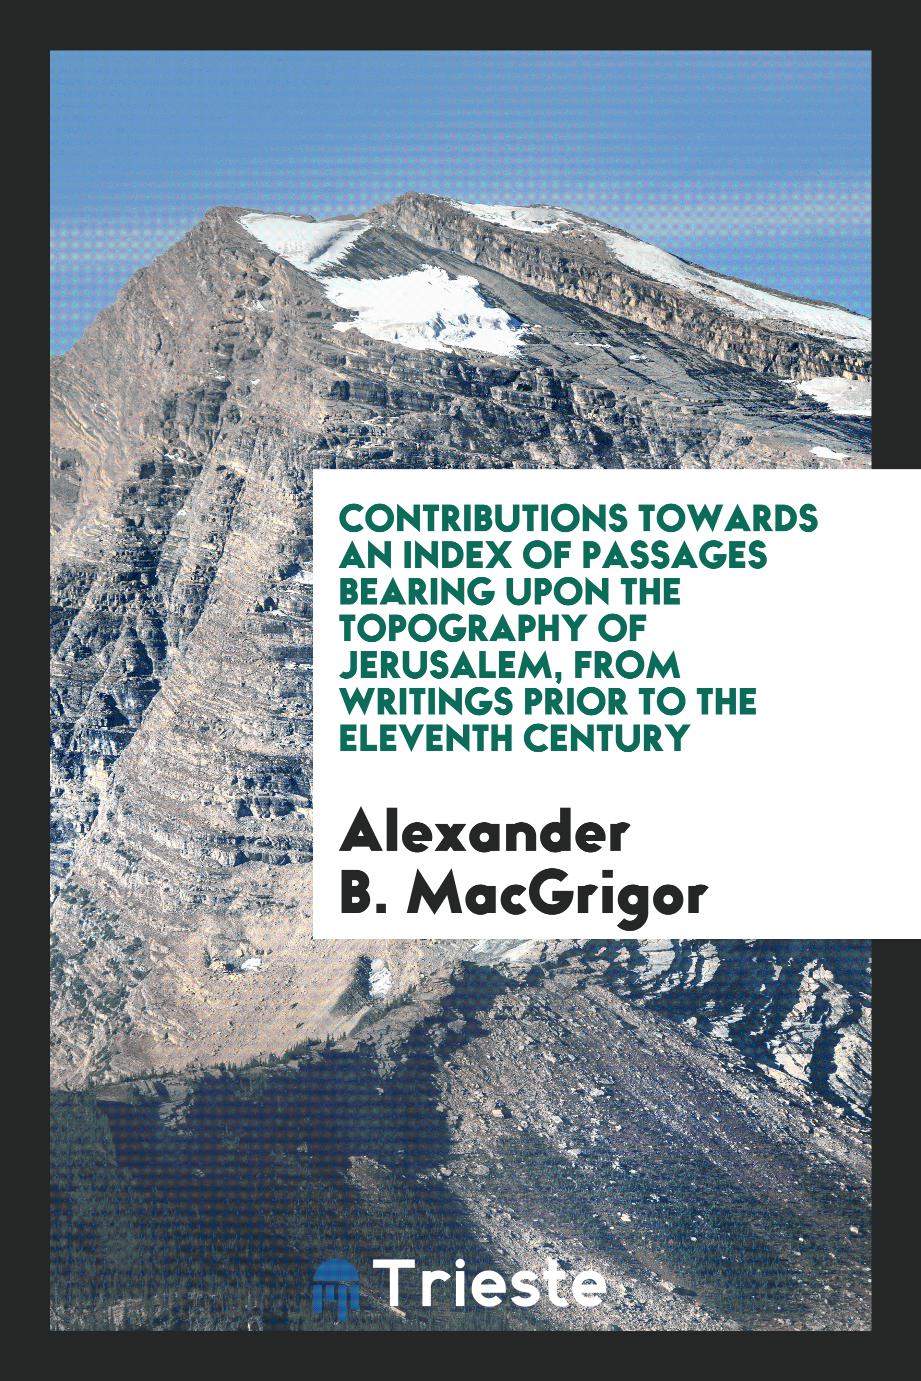 Contributions Towards an Index of Passages Bearing upon the Topography of Jerusalem, from Writings Prior to the Eleventh Century